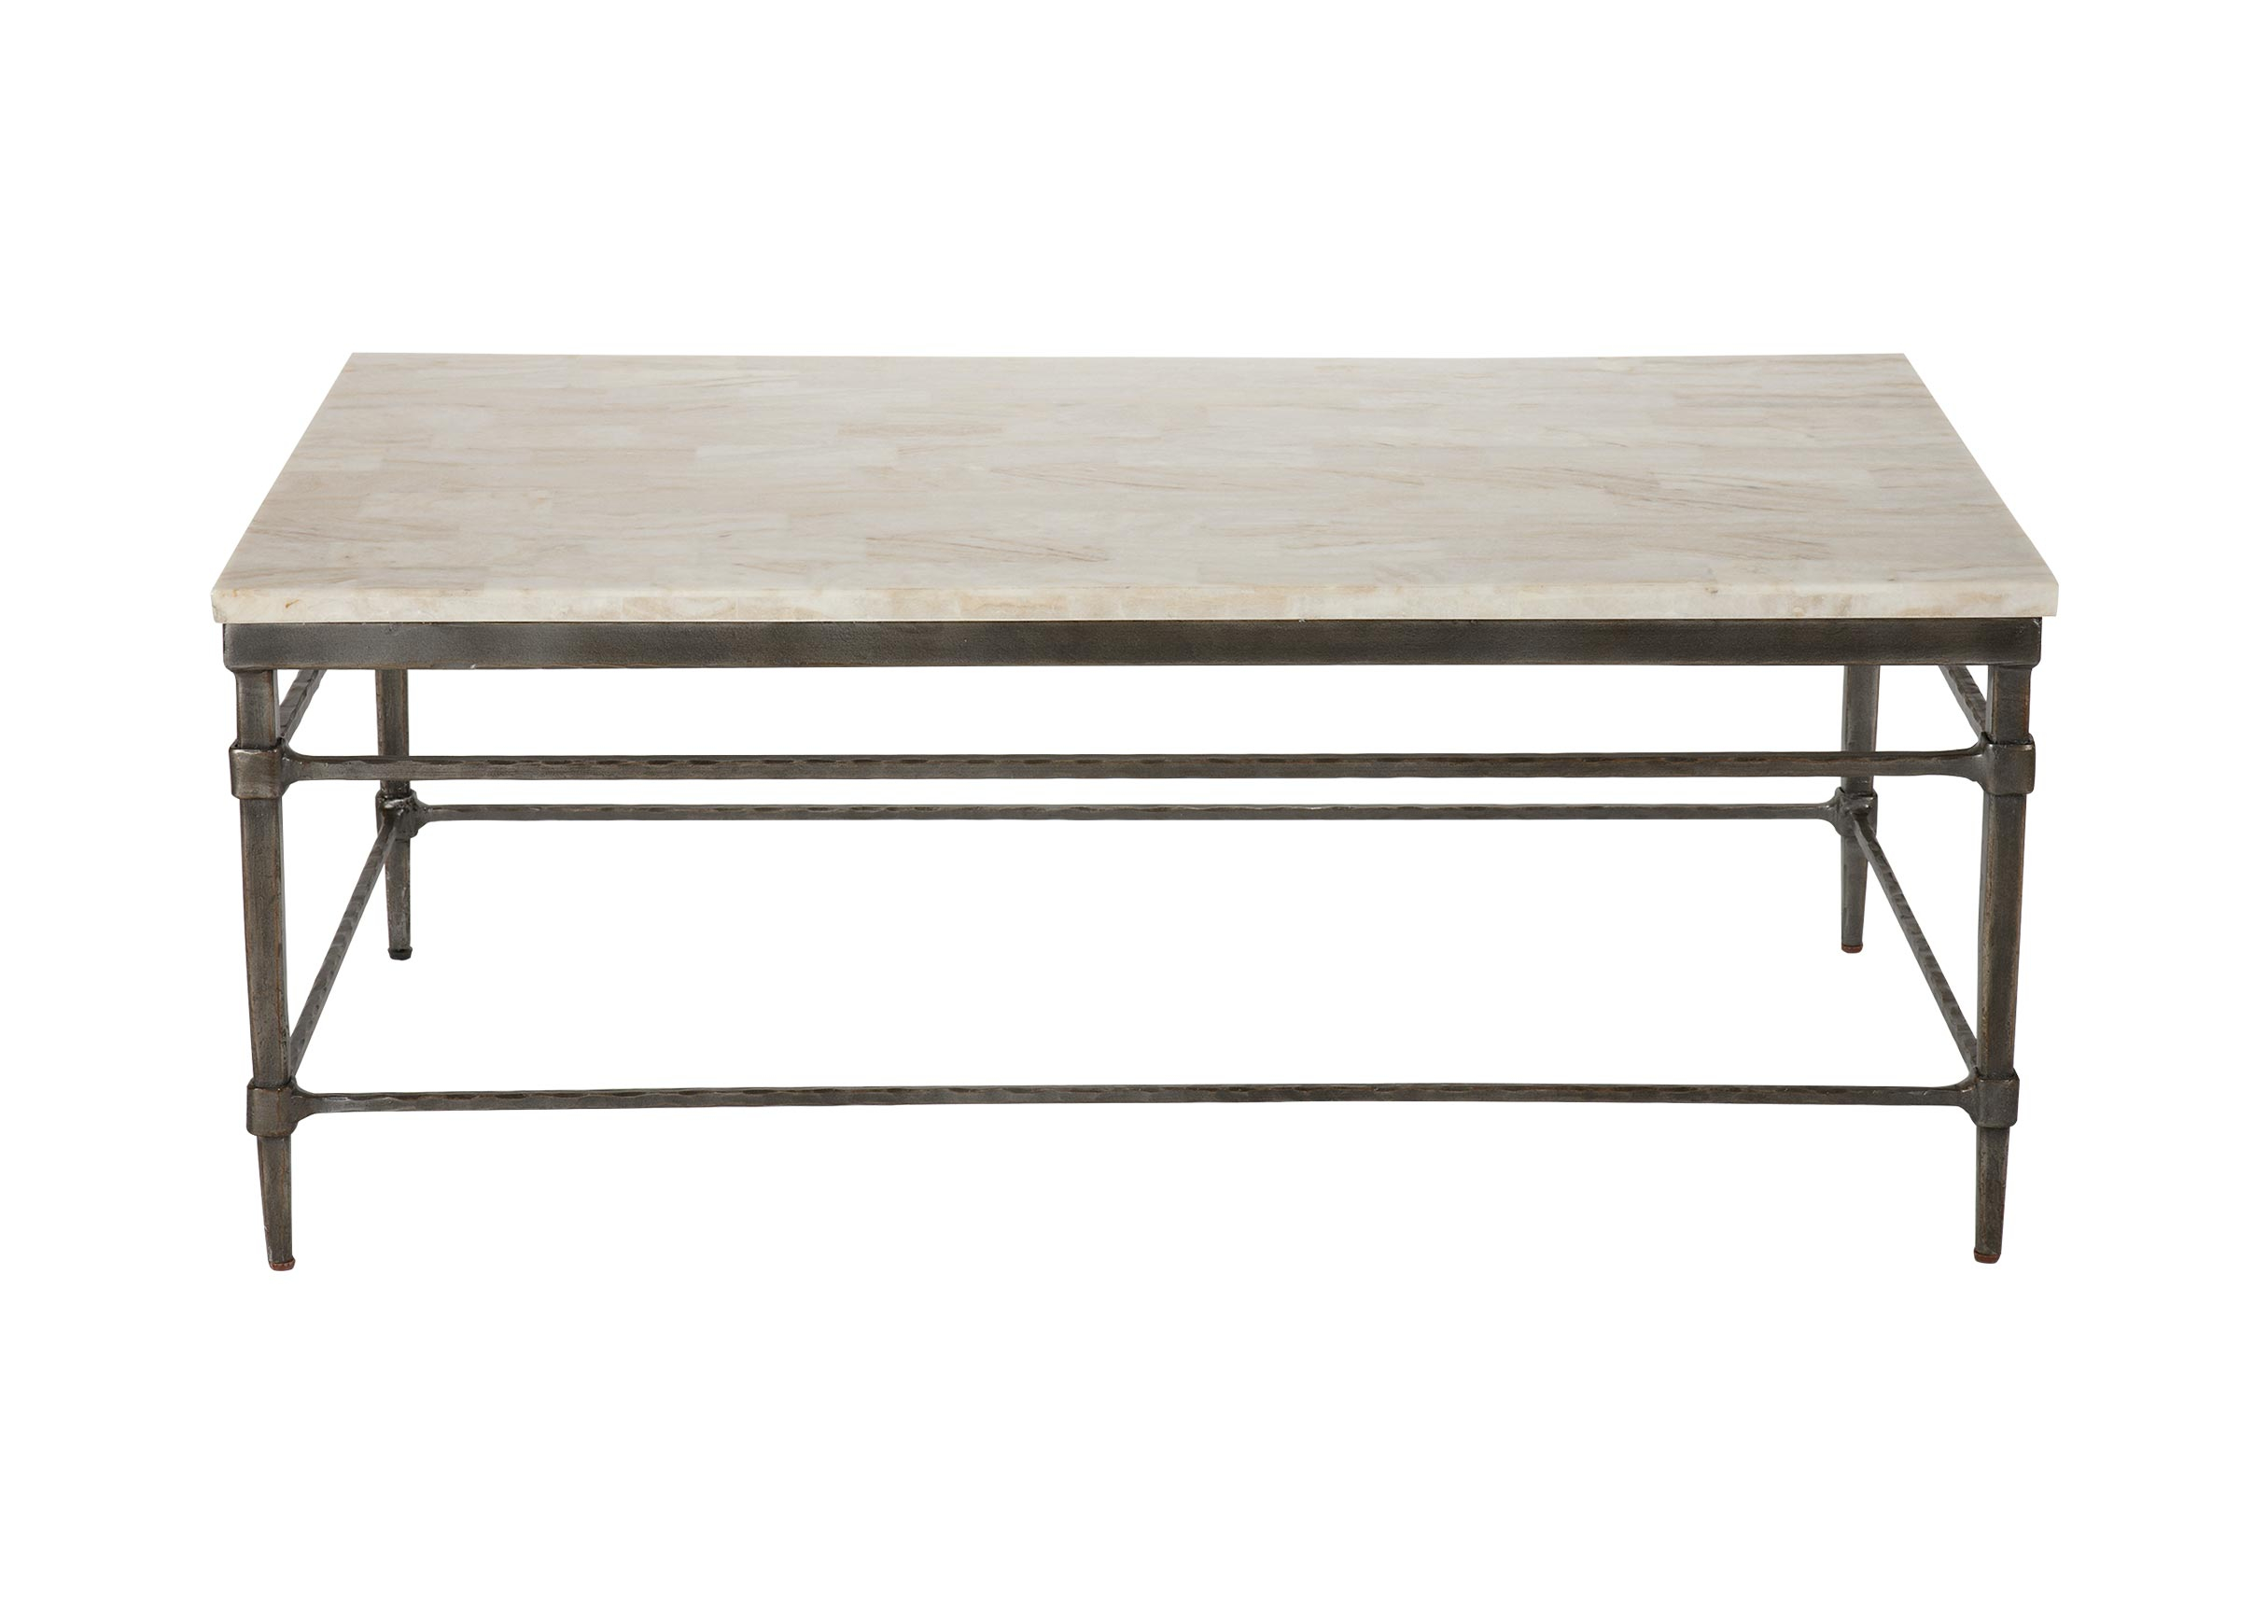 Vida Stone Top Coffee Table Coffee Tables Ethan Allen with regard to size 2430 X 1740